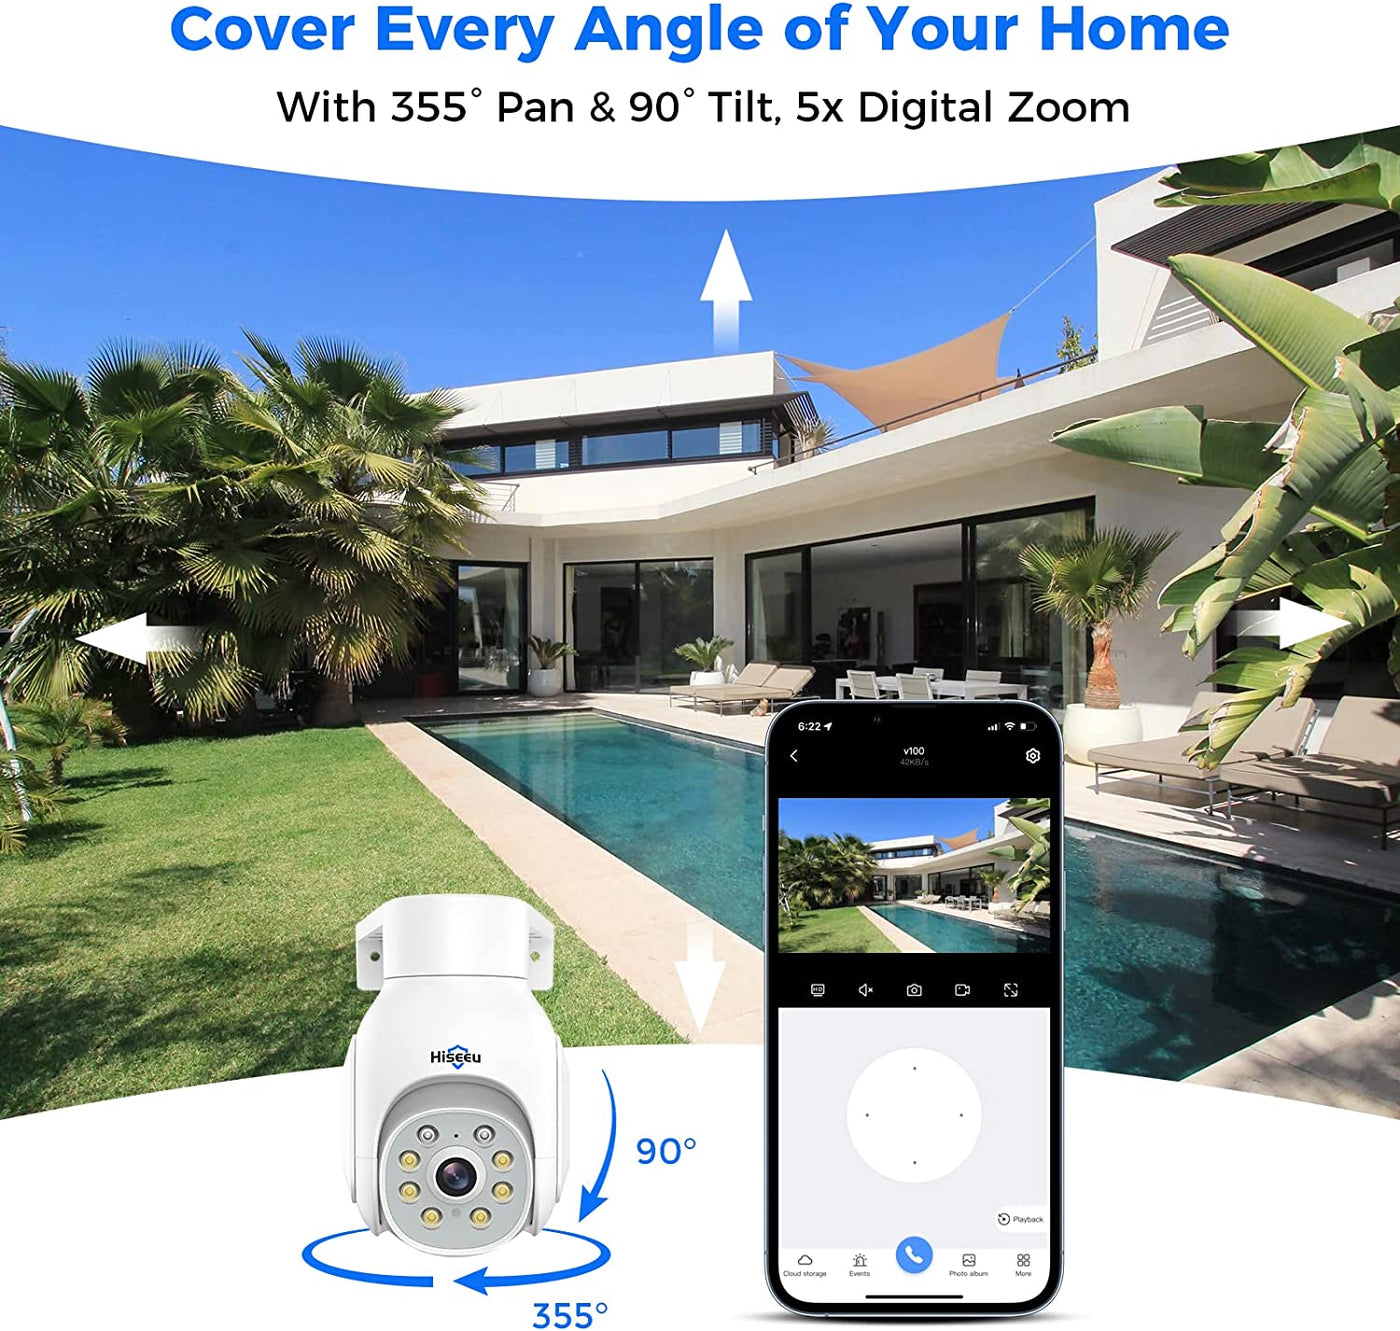 Security Camera Wireless Outdoor, 5MP Color Night Vision WiFi Surveillance Camera Pan/Tilt with Motion Detection/Siren/Light Alarm, 2-Way Audio, IP66 Weatherproof, Work with Echo Show